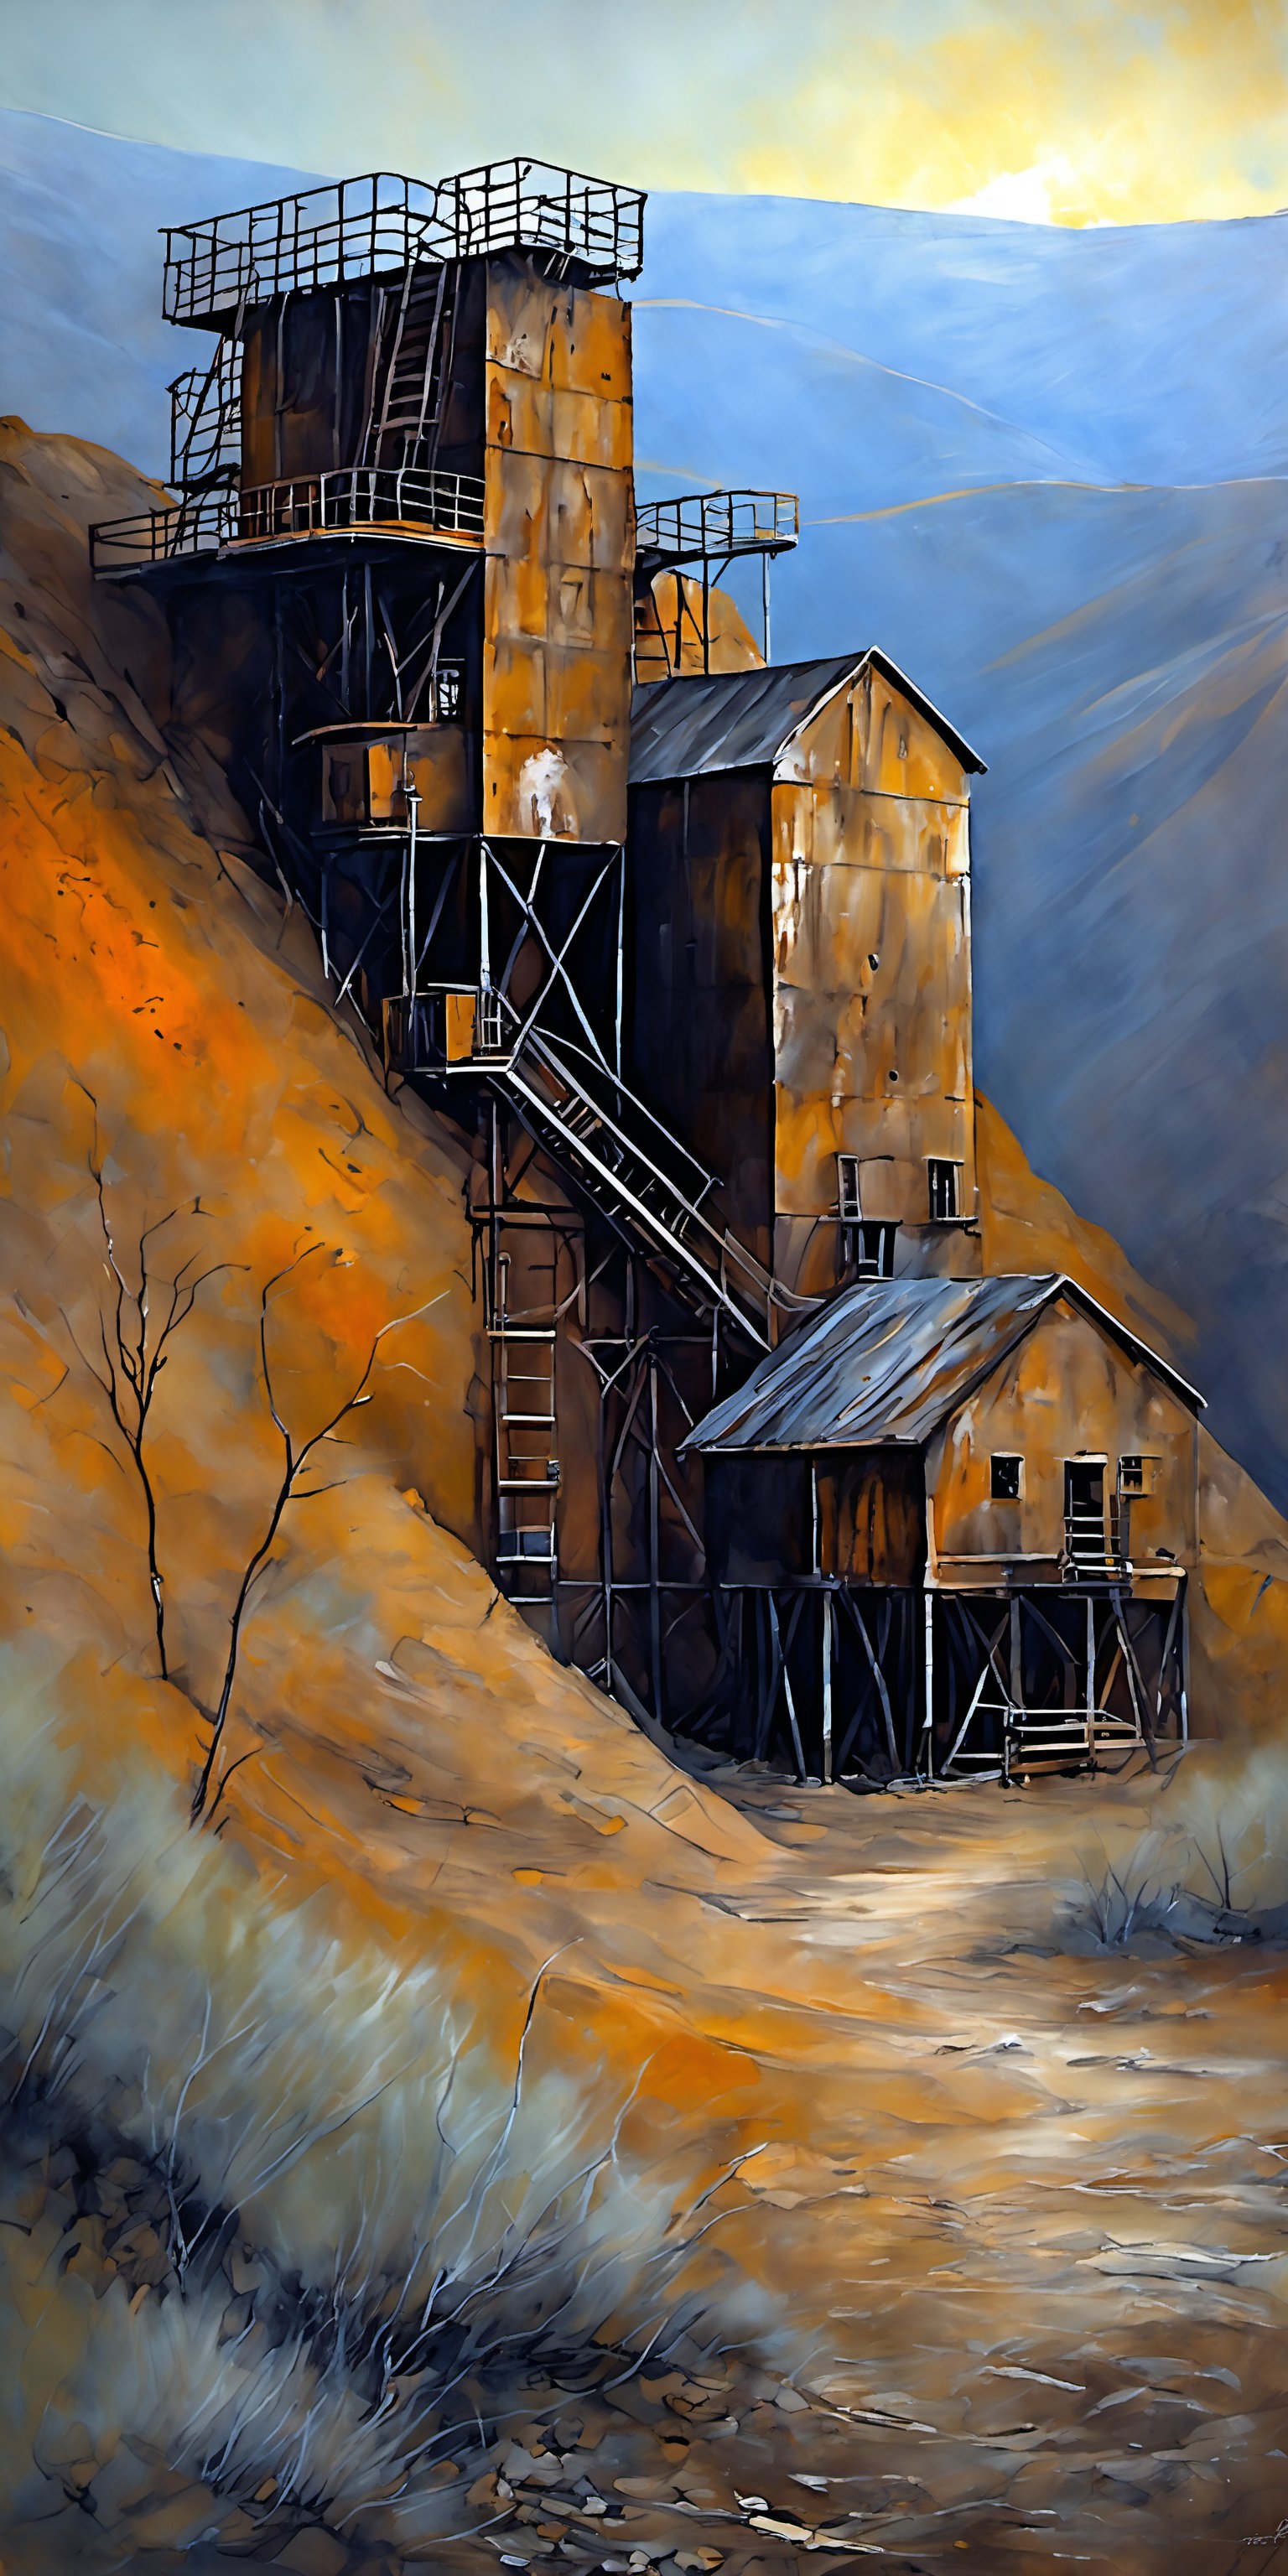 "Close-up view, hyperrealistic oil painting of the worn and aged appearance of a large, weathered silver mine, showing signs of extensive use and time-worn equipment. The silver mine should appear short and stooped, with dirt-covered equipment, tattered and worn appearance, and dirt on the machinery. The sky should be ablaze with the soft and diffused colors of a spectacular sunset behind the silver mine, casting gentle shadows and creating an ethereal atmosphere. The overall effect is a blend of impressionism and abstraction, creating a rich, immersive setting that complements the hyperrealistic, sharp focus on the worn and aged appearance of the large, weathered silver mine in the foreground. In contrast, the background should transition into an abstract, painterly environment with bold and textured brushstrokes adding depth and movement. The overall effect should capture the immense scale and rugged beauty of the scene, with dramatic lighting emphasizing the textures and features of the silver mine. The atmosphere should be hazy and diffuse, contributing to an ethereal and somewhat dystopian feel. Indistinct forms and shapes in the background should suggest a spectacular sunset in the mountains, rendered in a loose, impressionistic style to emphasize mood and atmosphere over detailed realism. Use a muted color palette with cooler tones such as grays, blues, and greens to create depth and atmosphere. Use muted shades of earthy tones to depict worn, weathered and aged appearances. Use muted accents like rusty orange-yellows and rusty teals to highlight tiny areas and add visual interest. Use this blend of subdued and bold colors to emphasize the gritty nature of the scene."